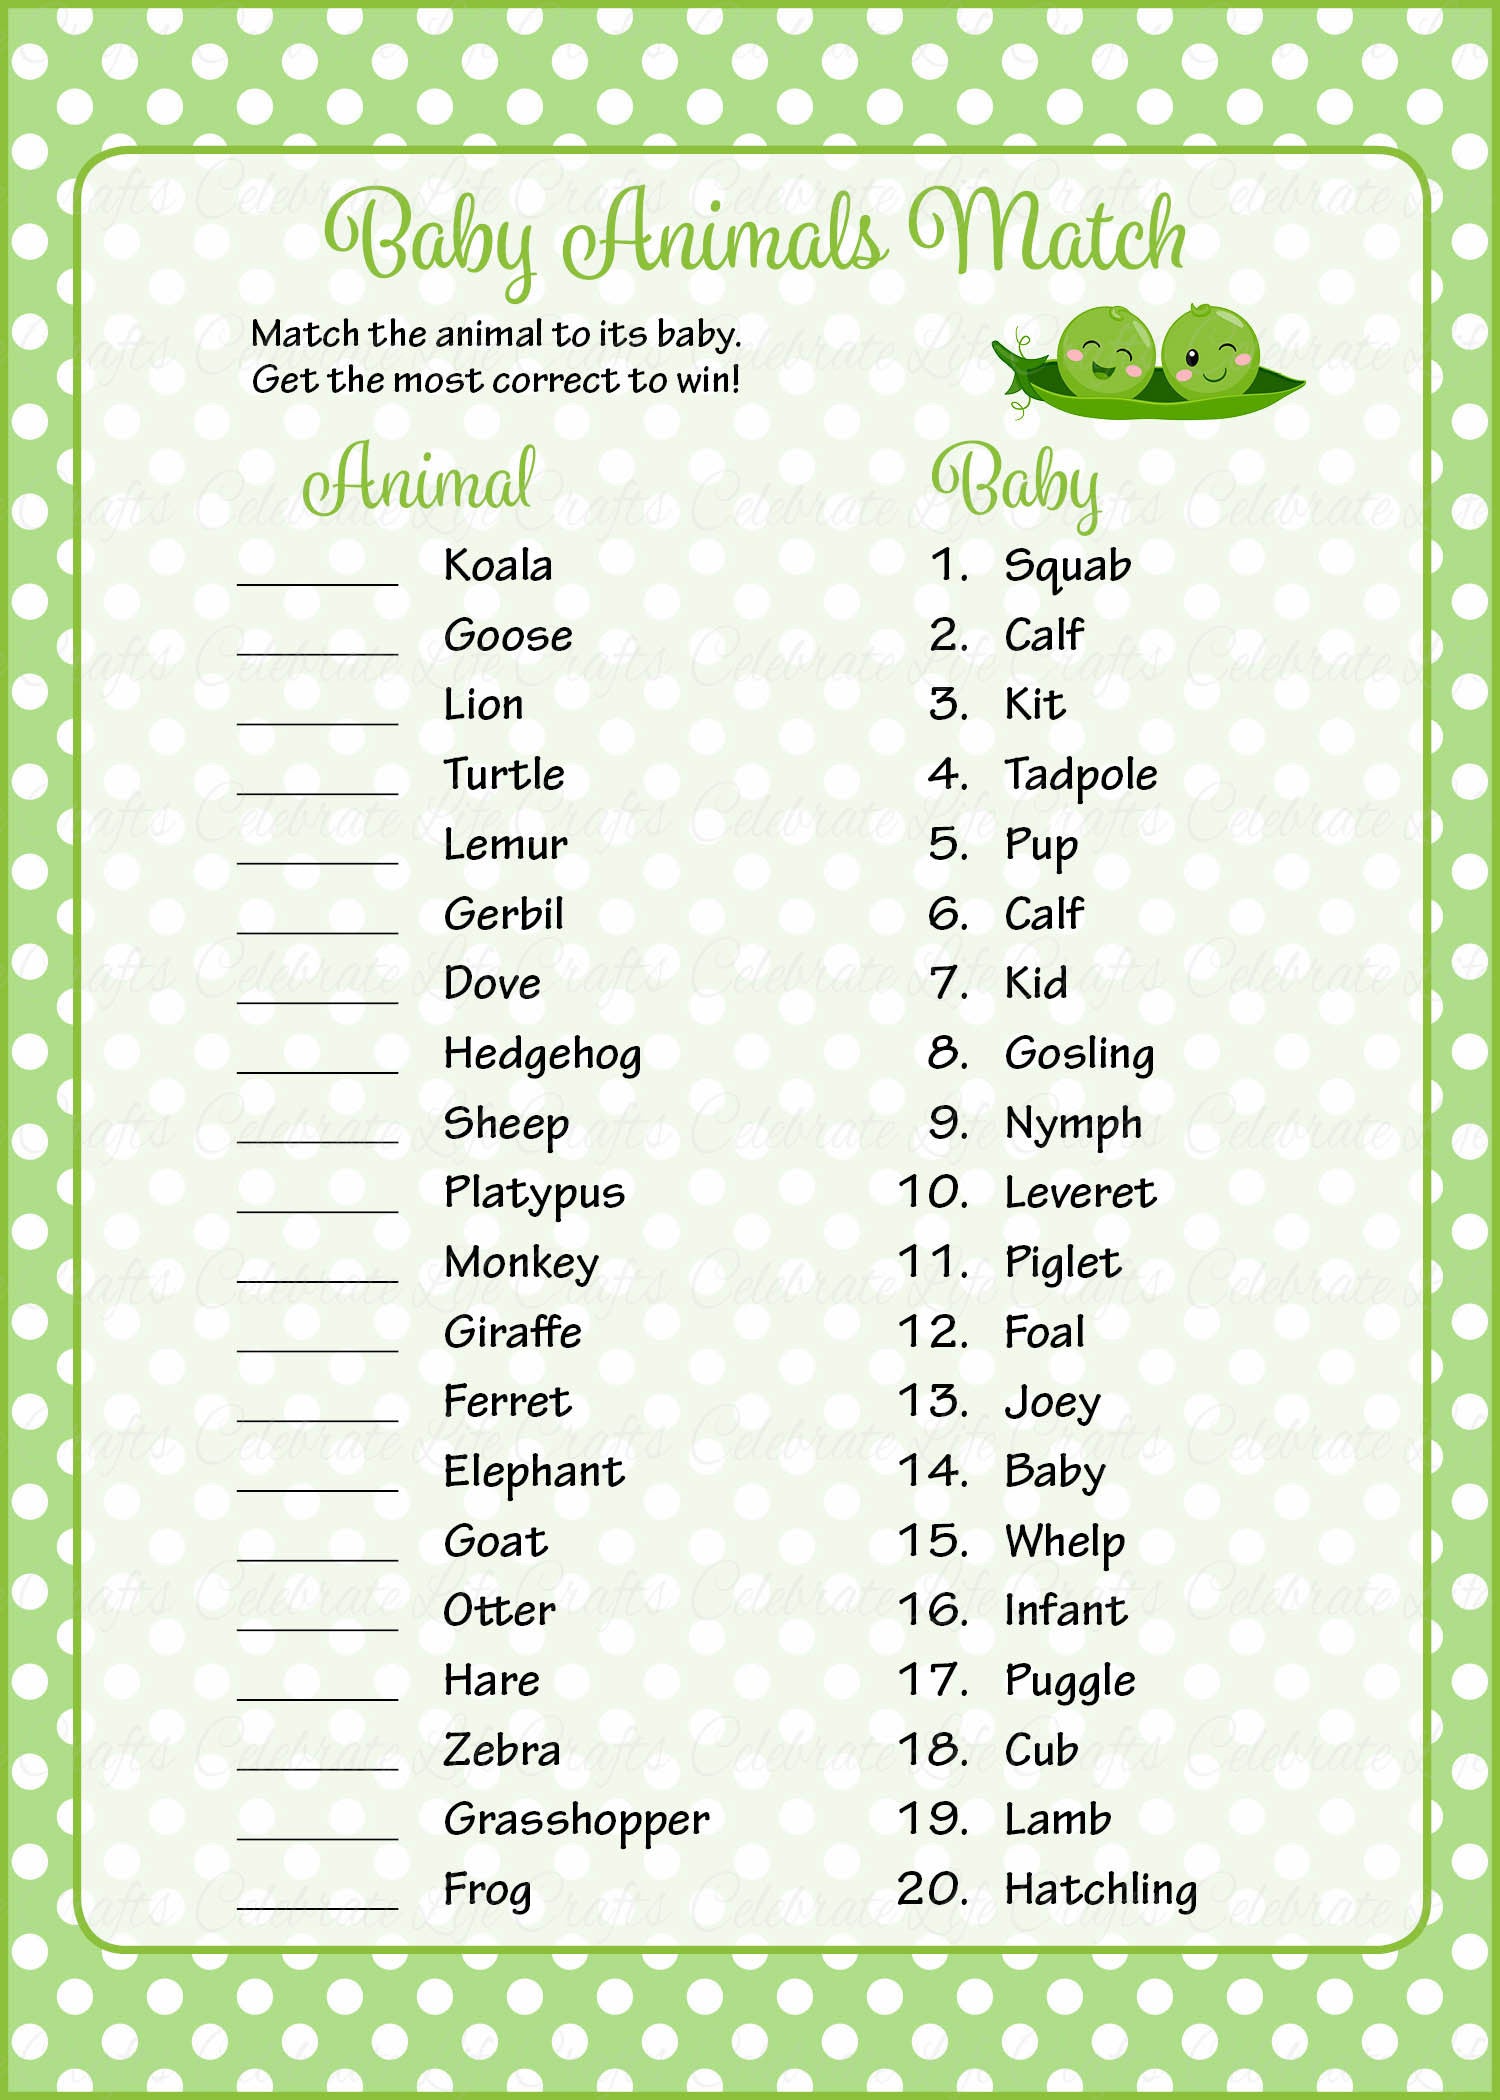 Baby Animals Match Baby Shower Game - in a Pod Baby Shower Theme for Baby Boy Twins - Green Polka Dots Celebrate Crafts